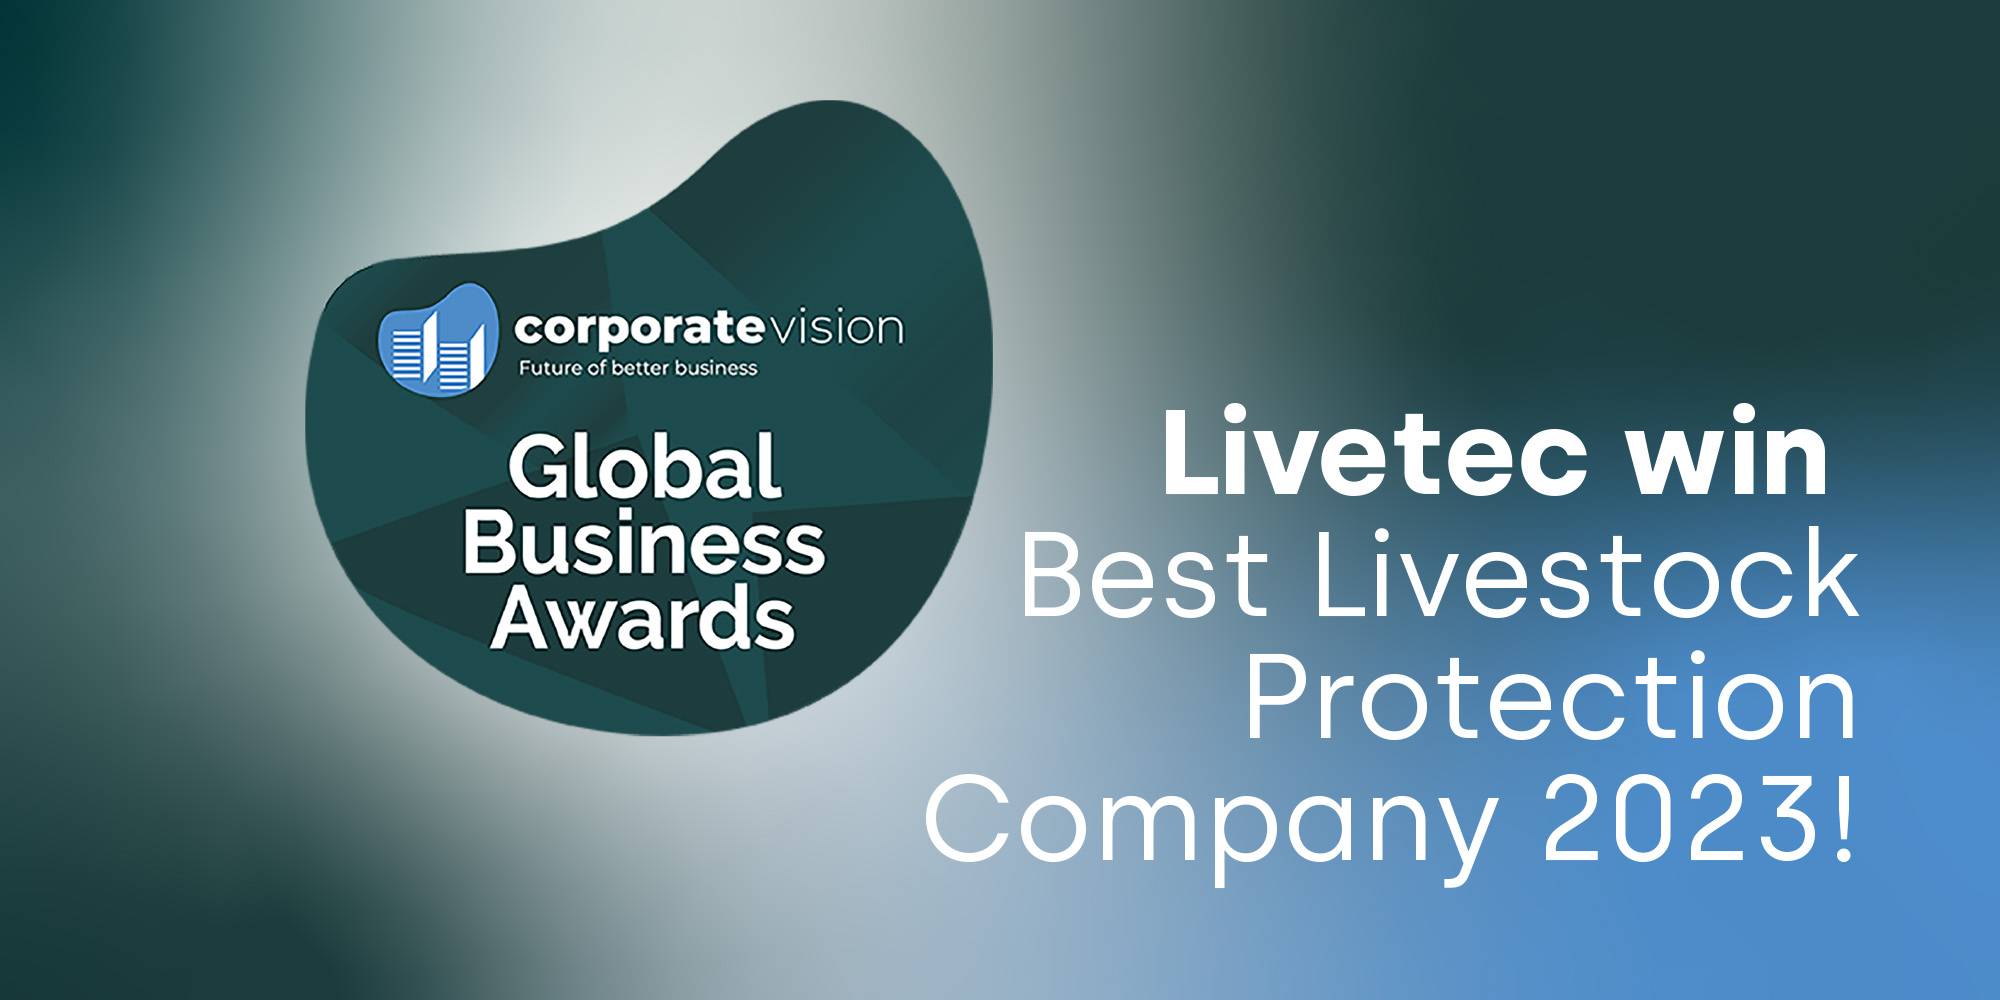 More recognition for Livetec as Best Livestock Protection Company 2023 blog graphic